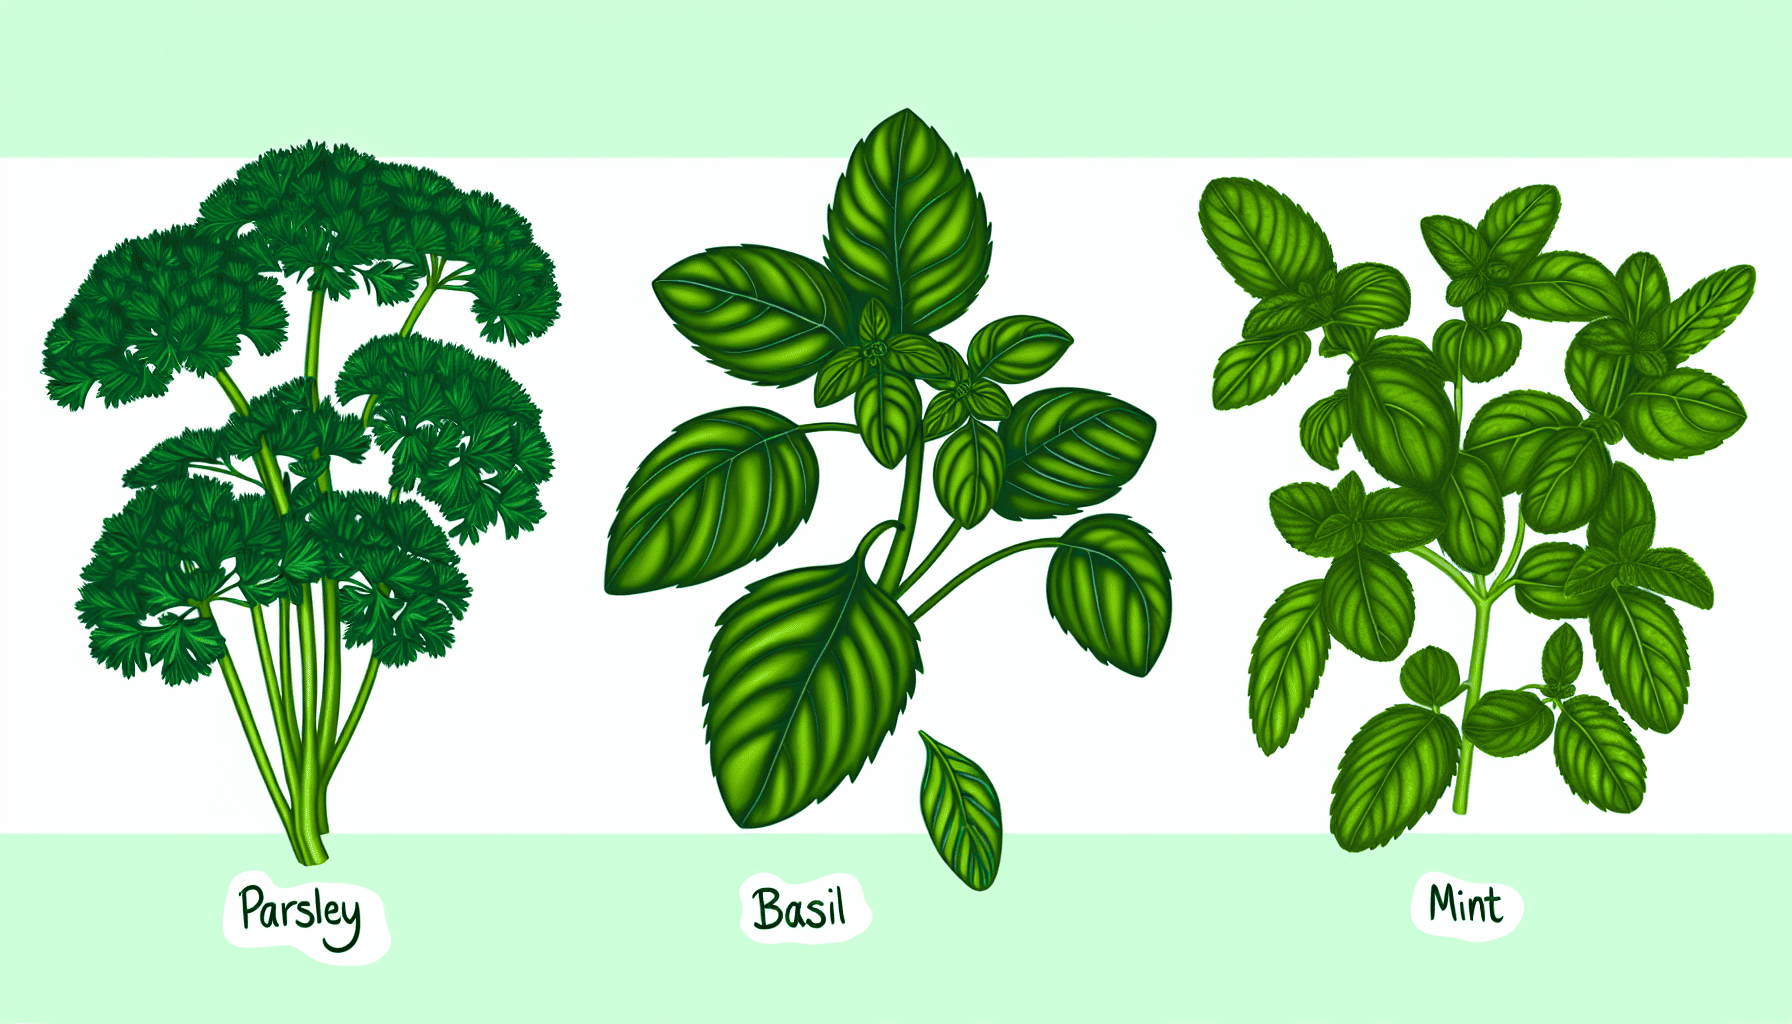 Parsley, basil, and mint leaves